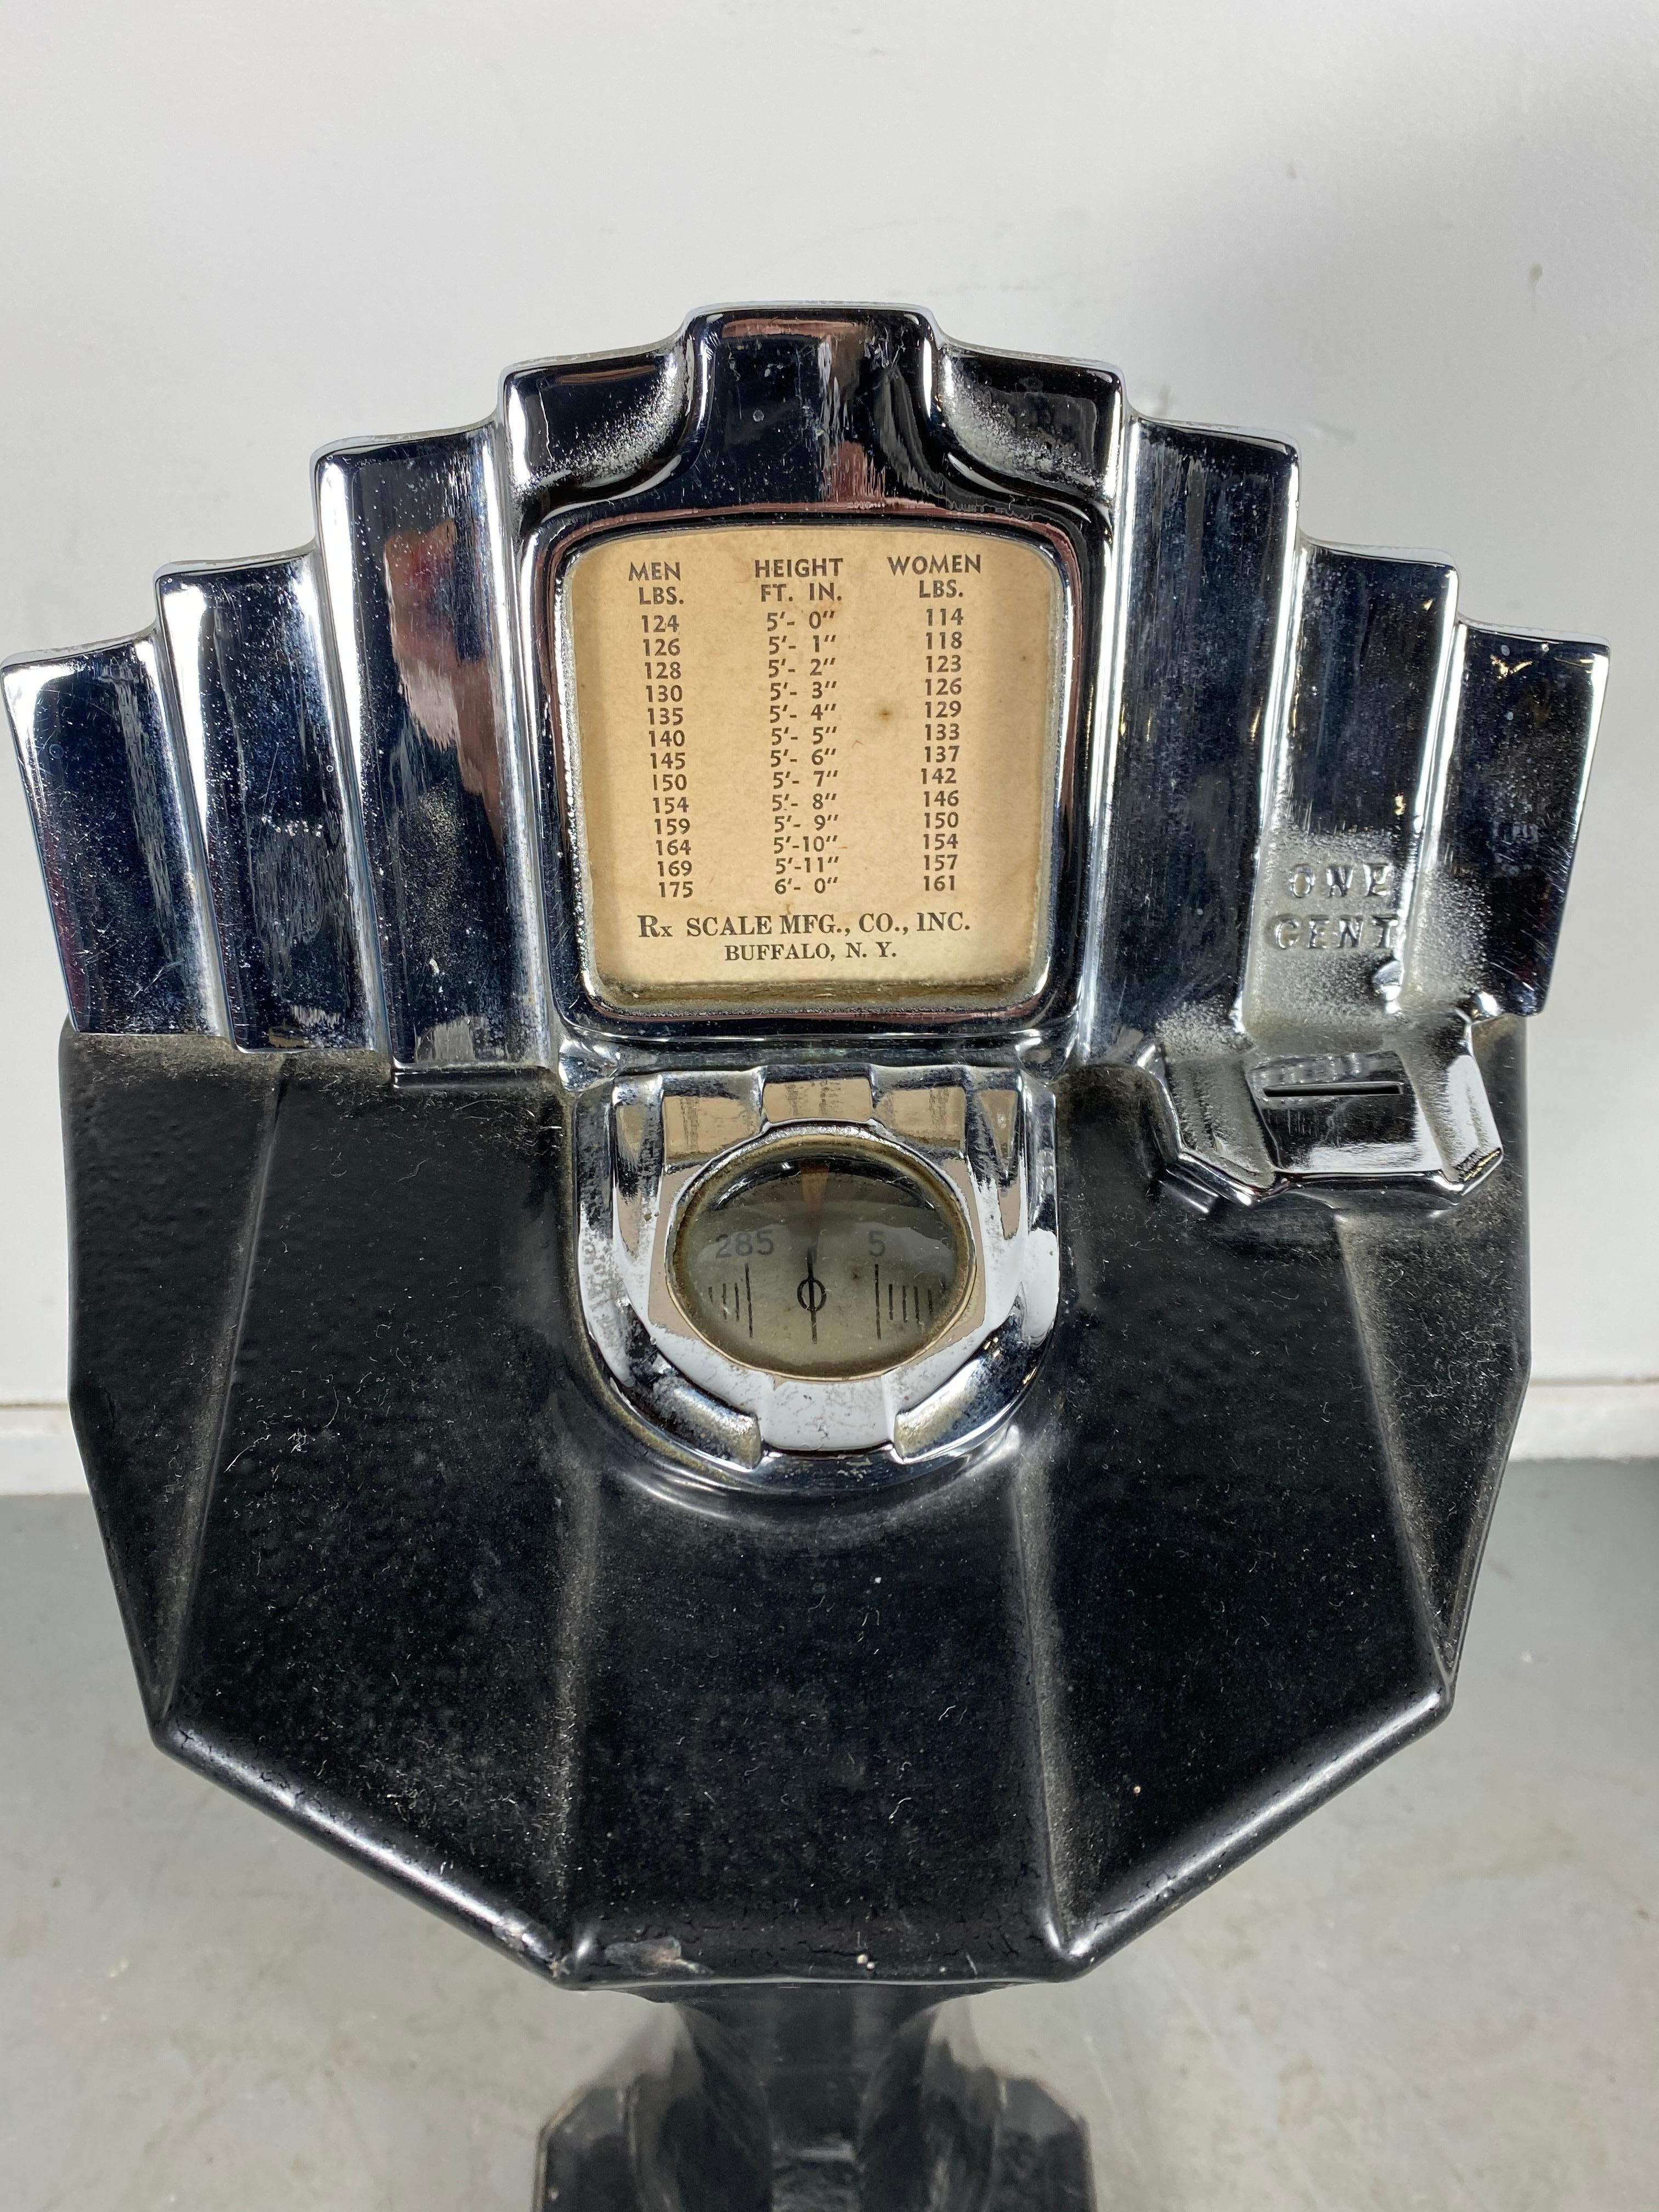 Stunning Art Deco Penny scale salvaged from old downtown Buffalo NY drug store, perfect working condition, accurate weight, retains original key/ keys. Great size and proportion, perfect addition to your Art Deco. Mid-Century Modernist bathroom.